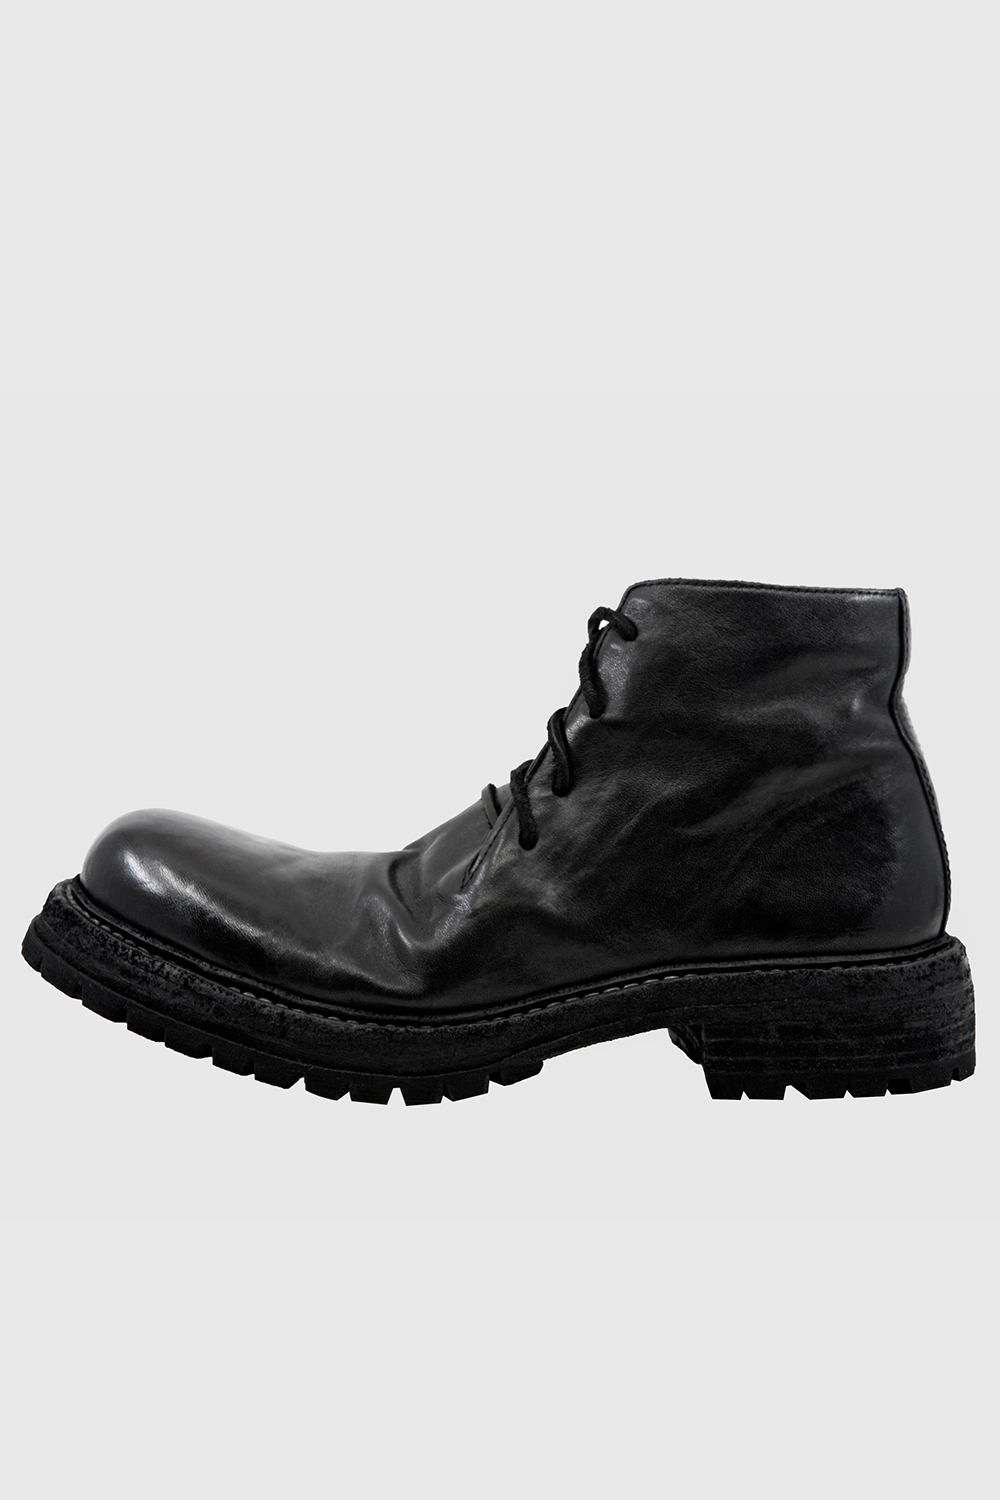 OnePiece 4hole boots Horse Leather (회원전용 할인코드 적용상품)